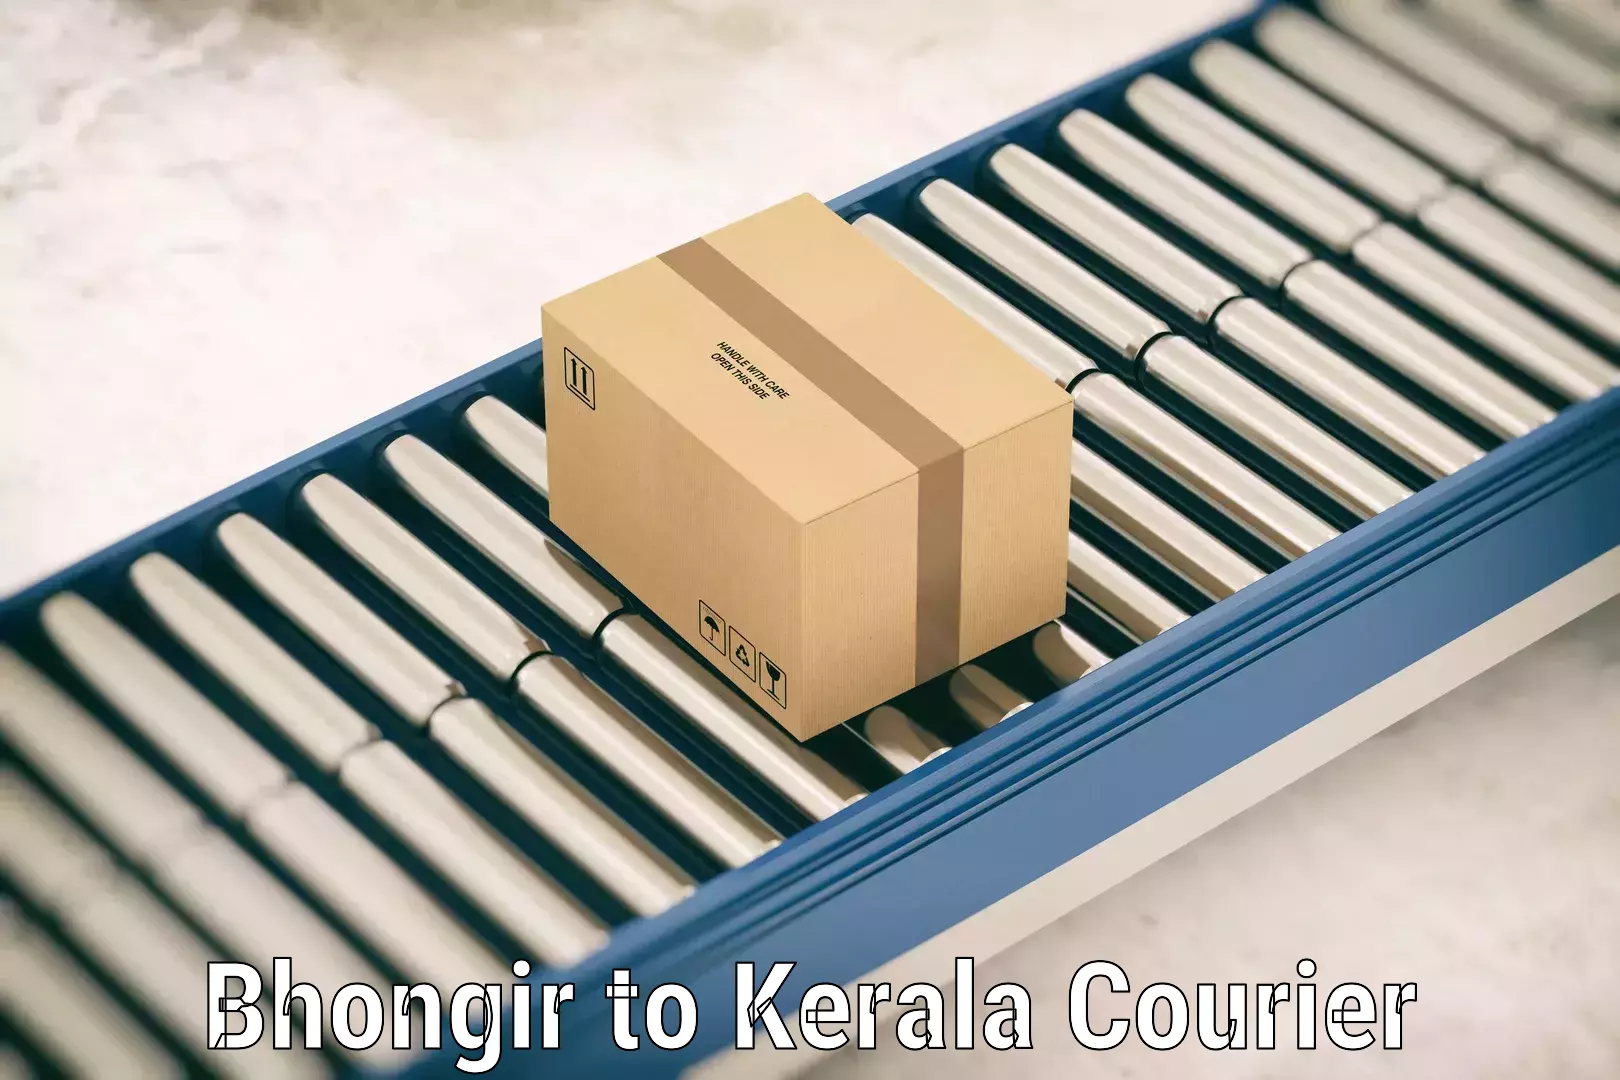 Luggage shipping specialists Bhongir to Kozhikode